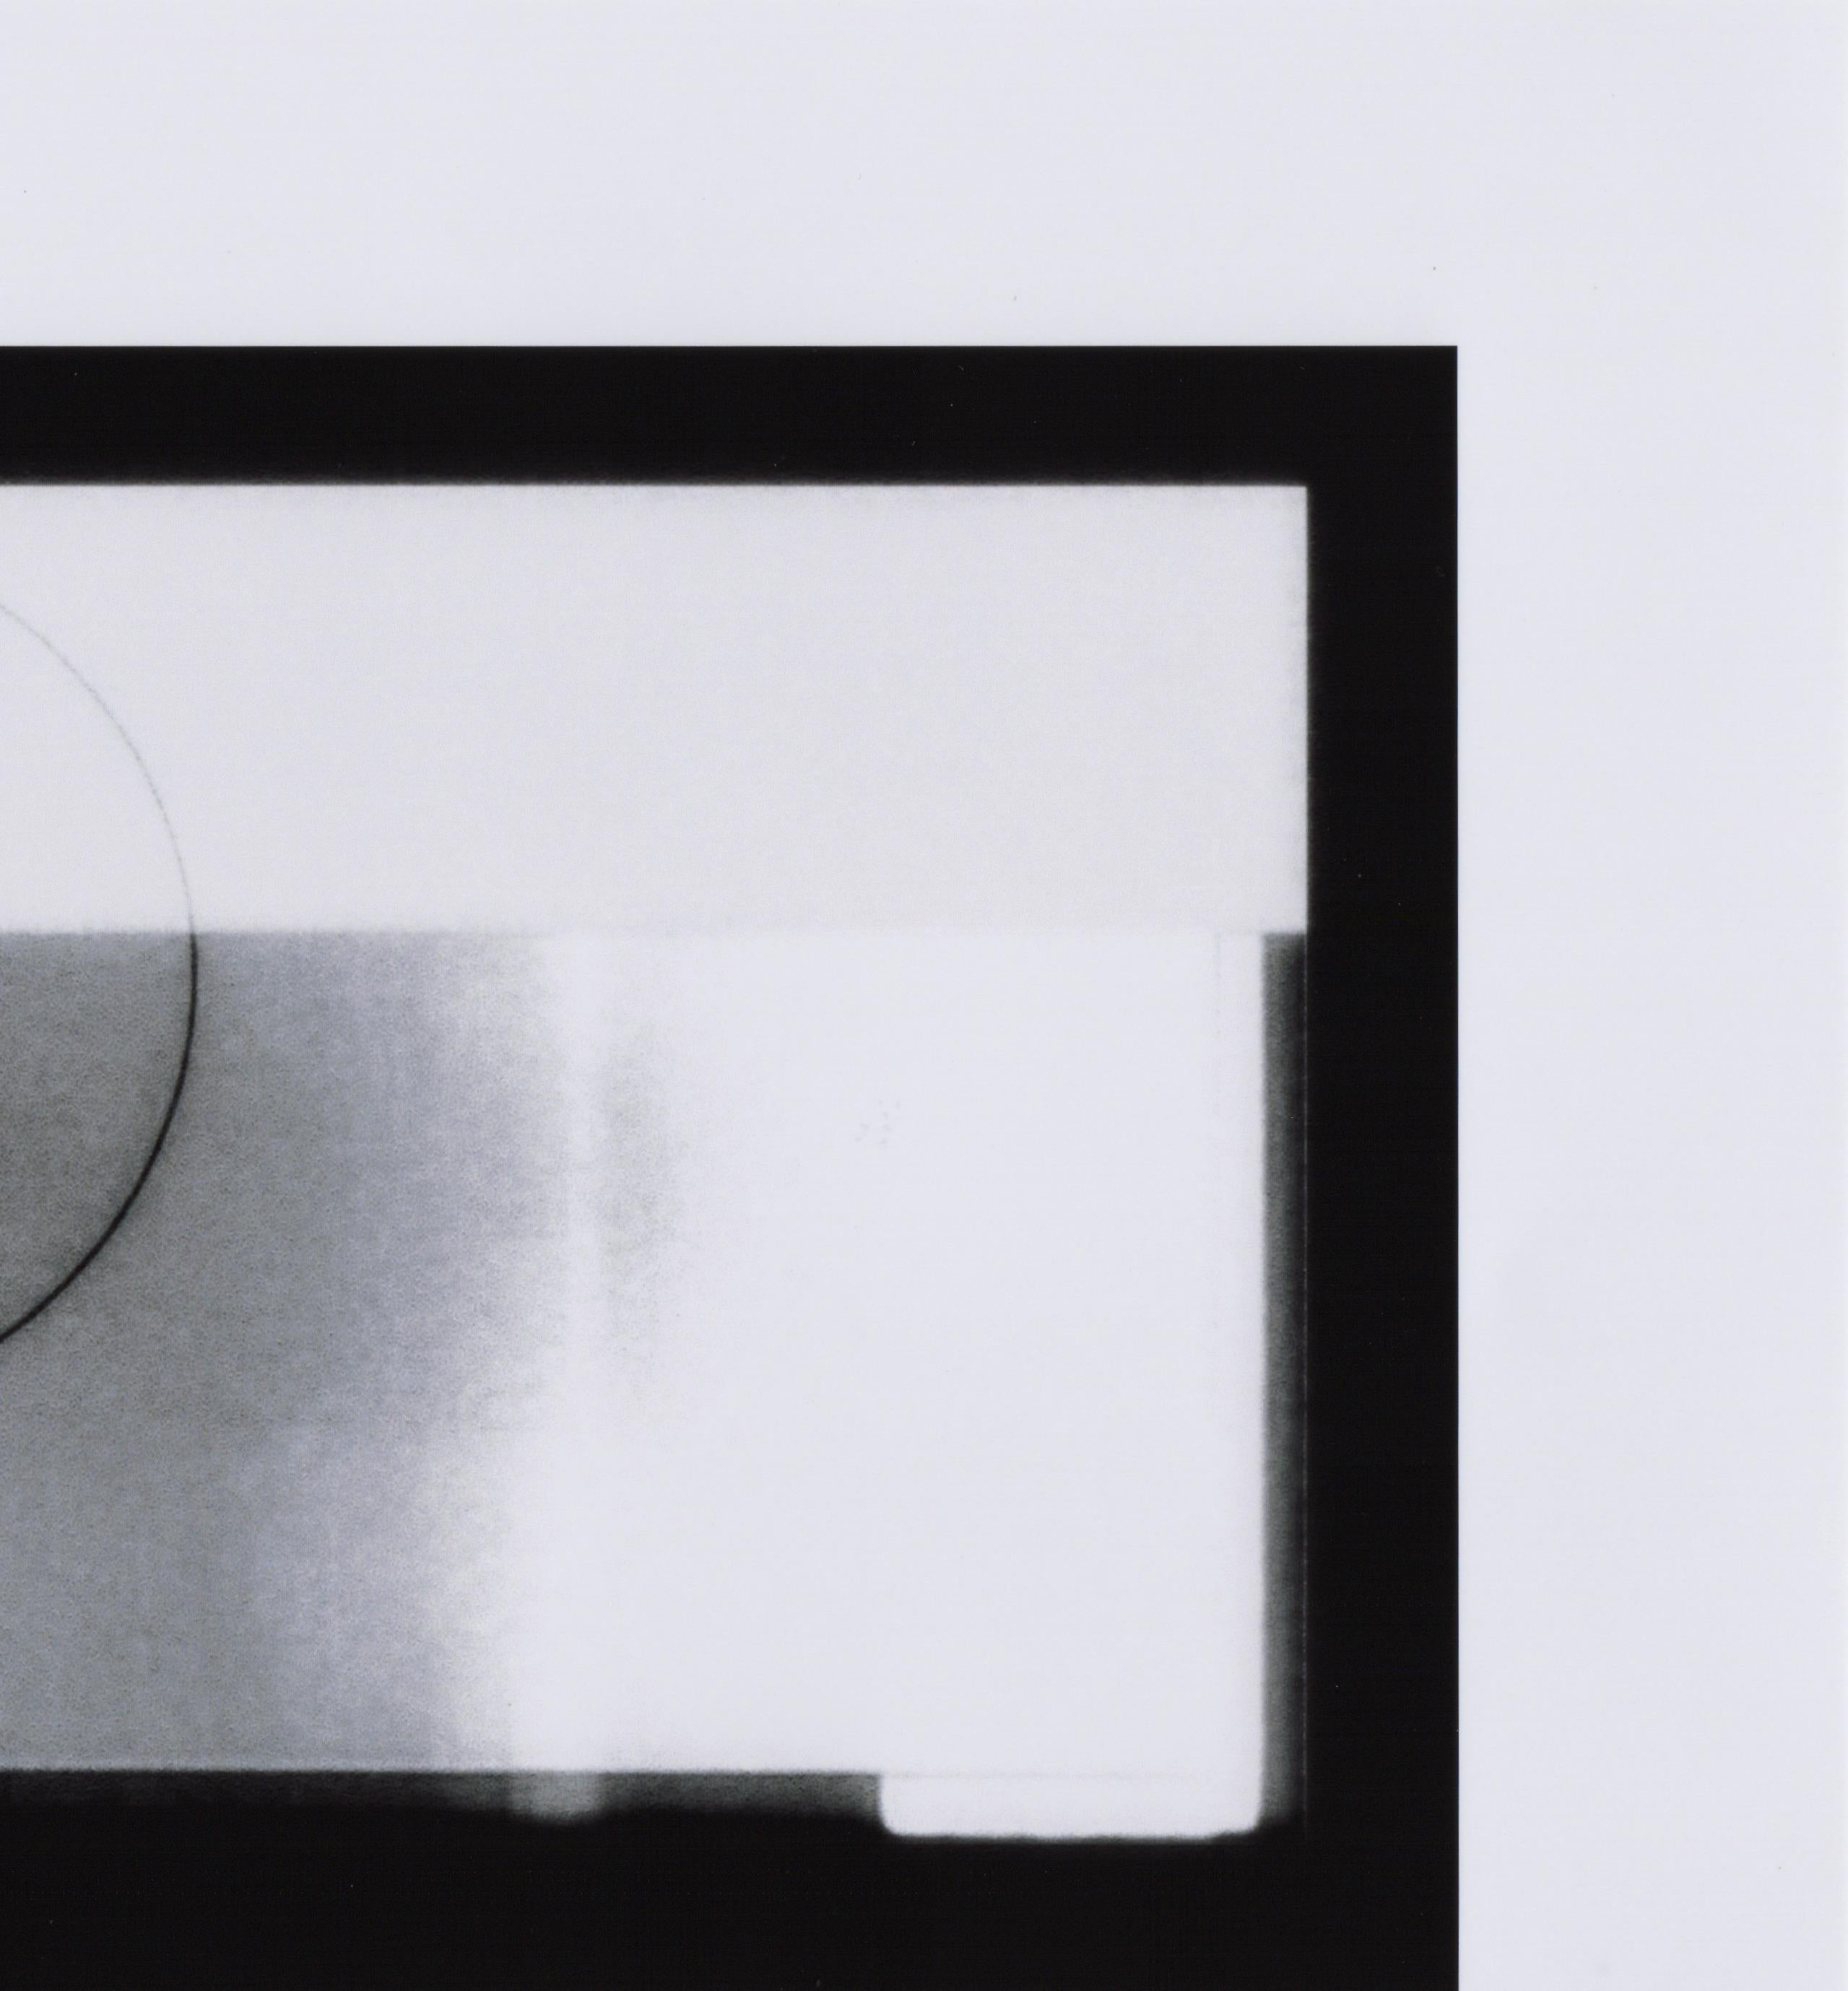 Patty deGrandpre’s “Mimeograph” is a unique abstract 6.25  x 10 inch inkjet print on 9 x 13 inch photo paper in black and white that incorporates a picture taken of a broken television screen. The contrasting hues, grain, and delineated circle of